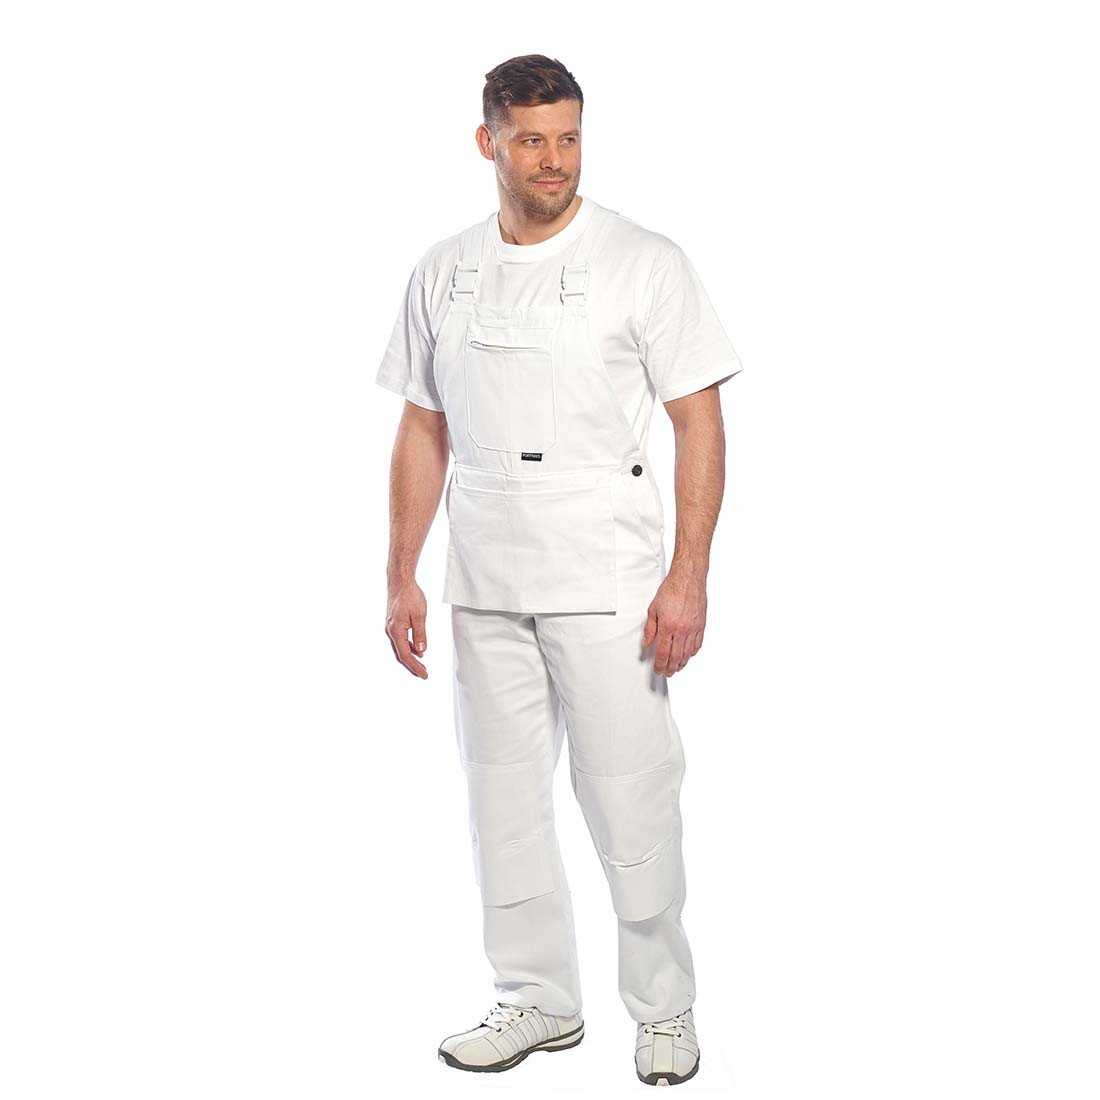 Portwest S810 Bolton Painters Bib and Brace Overalls in White